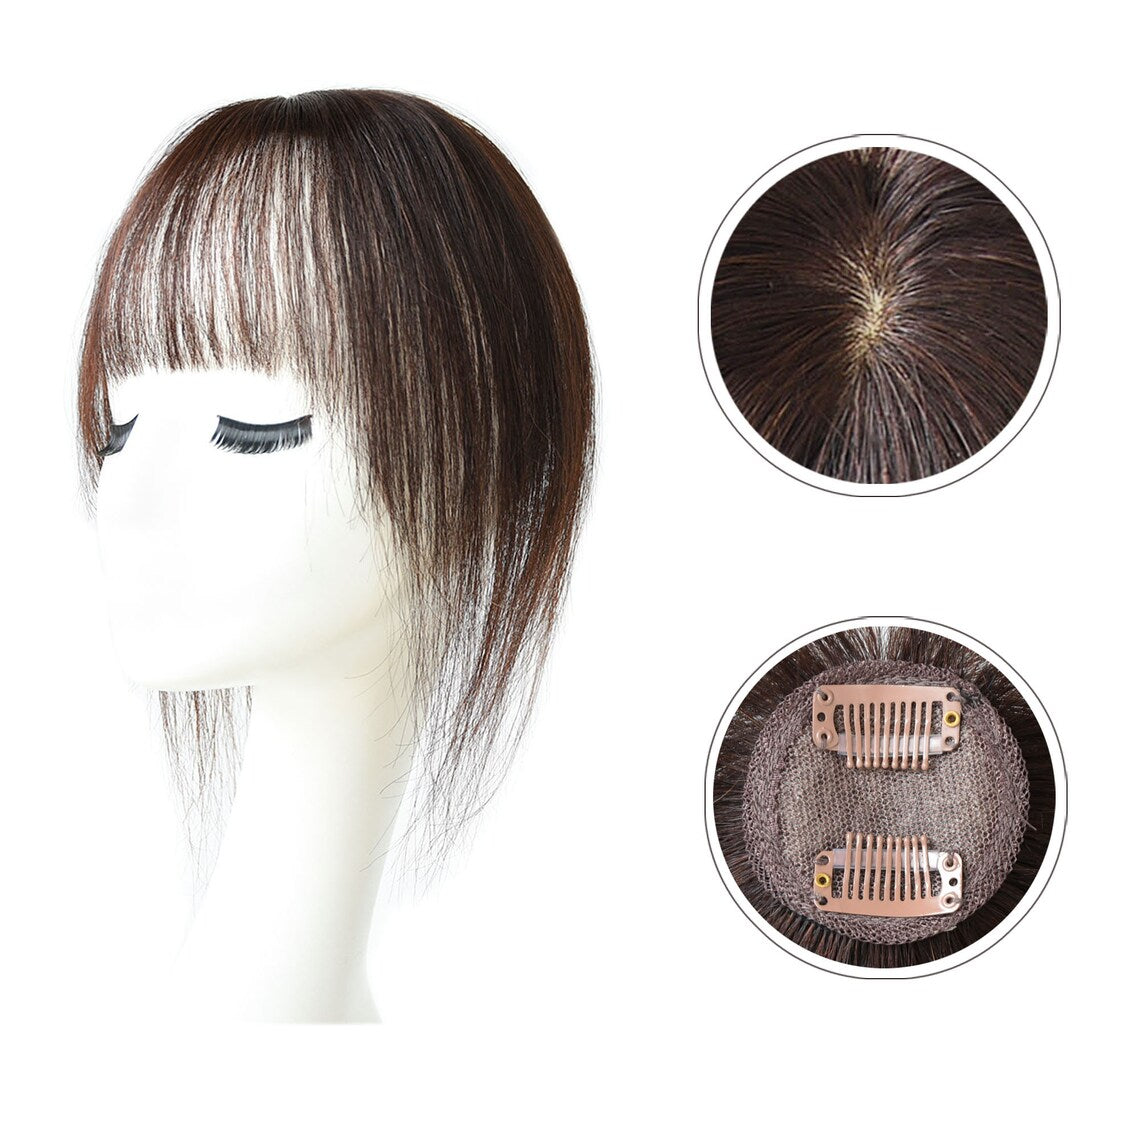 Hair Patch On The Top Of The Head, Hair Topper For Thin Hair